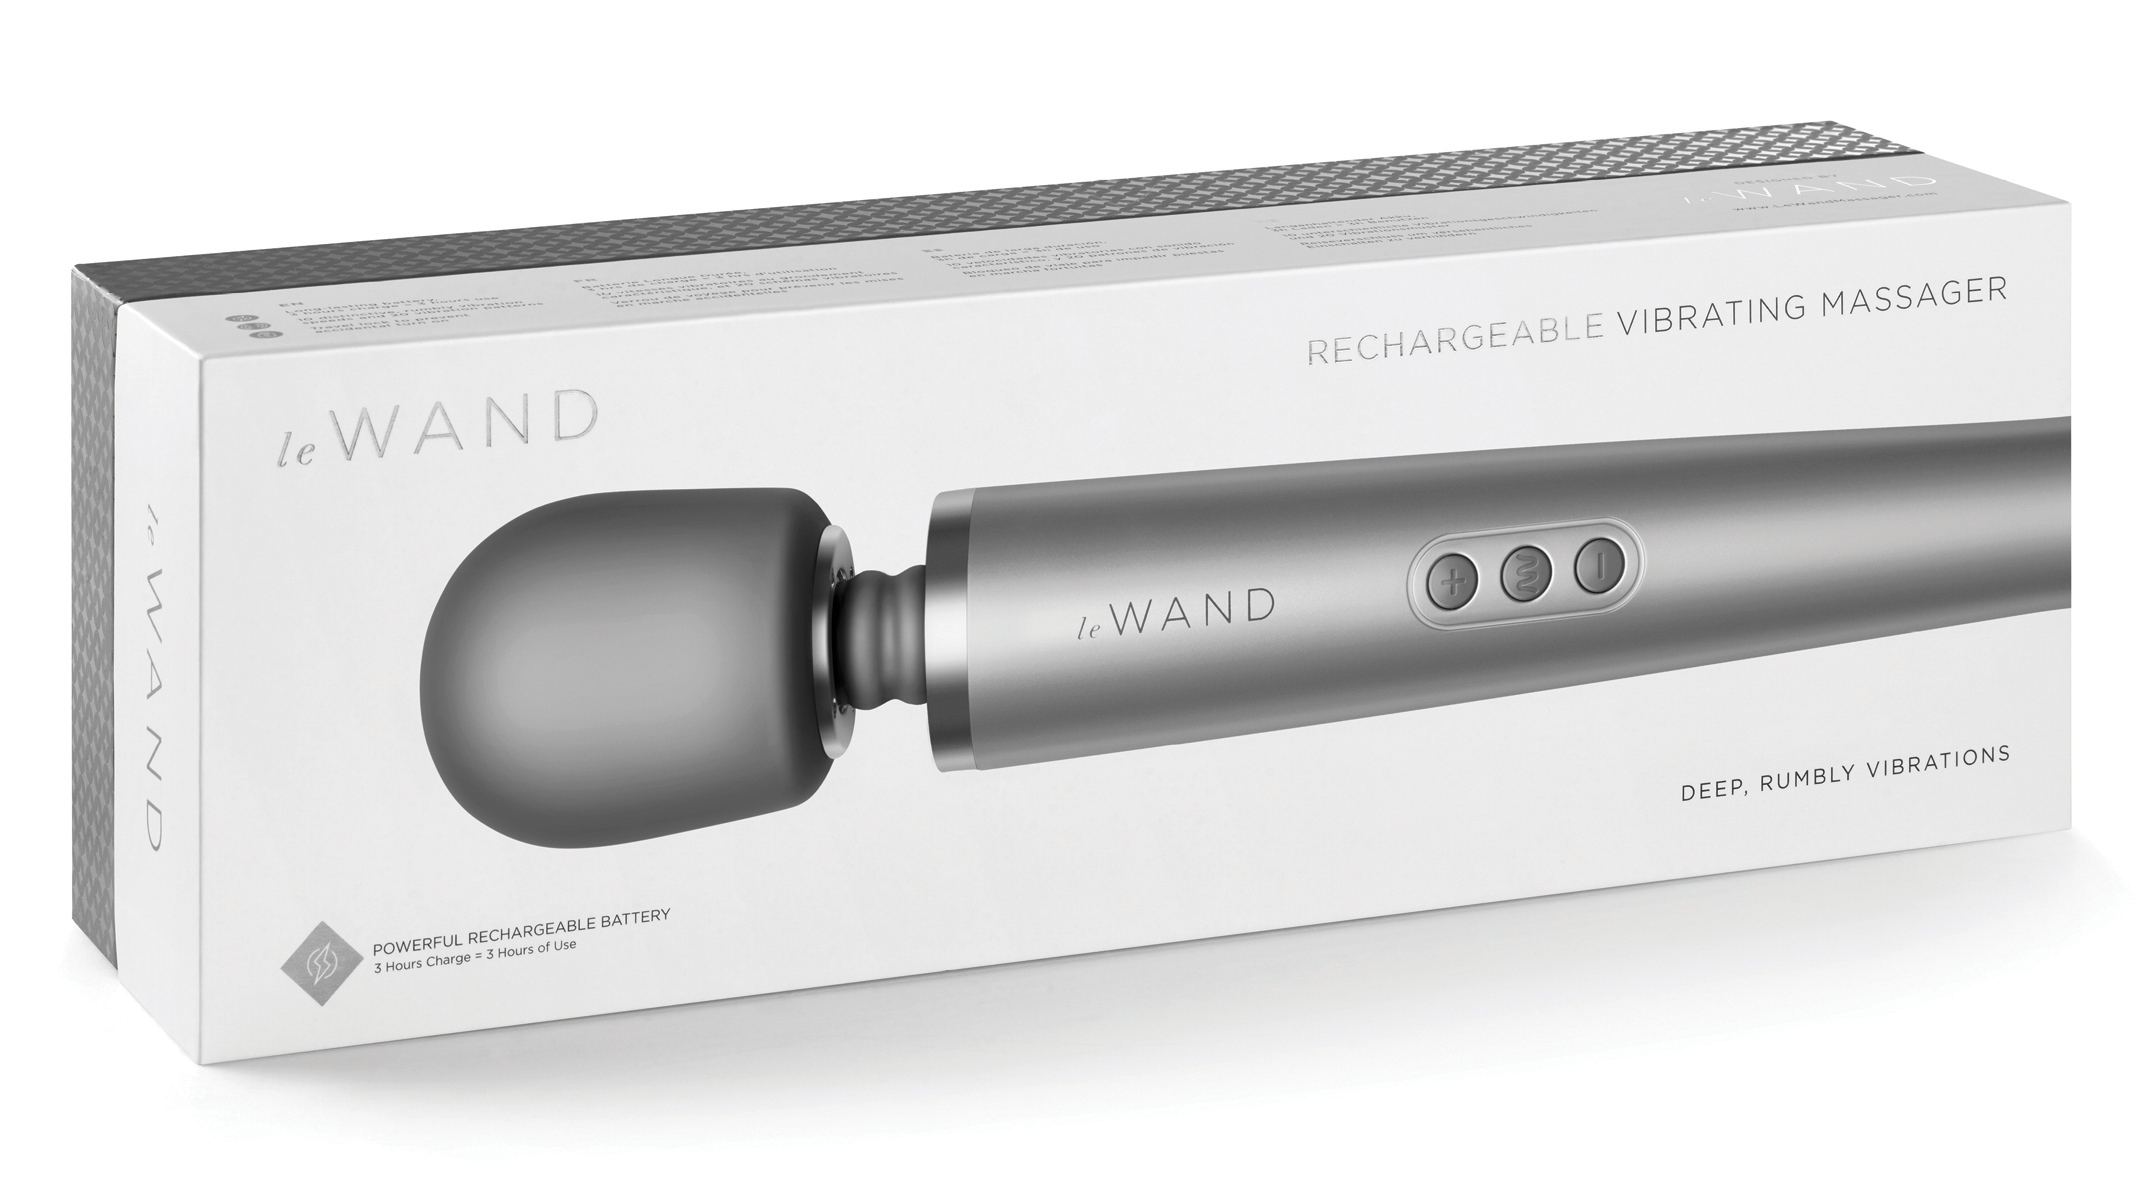 Le Wand Grey rechargeable massager